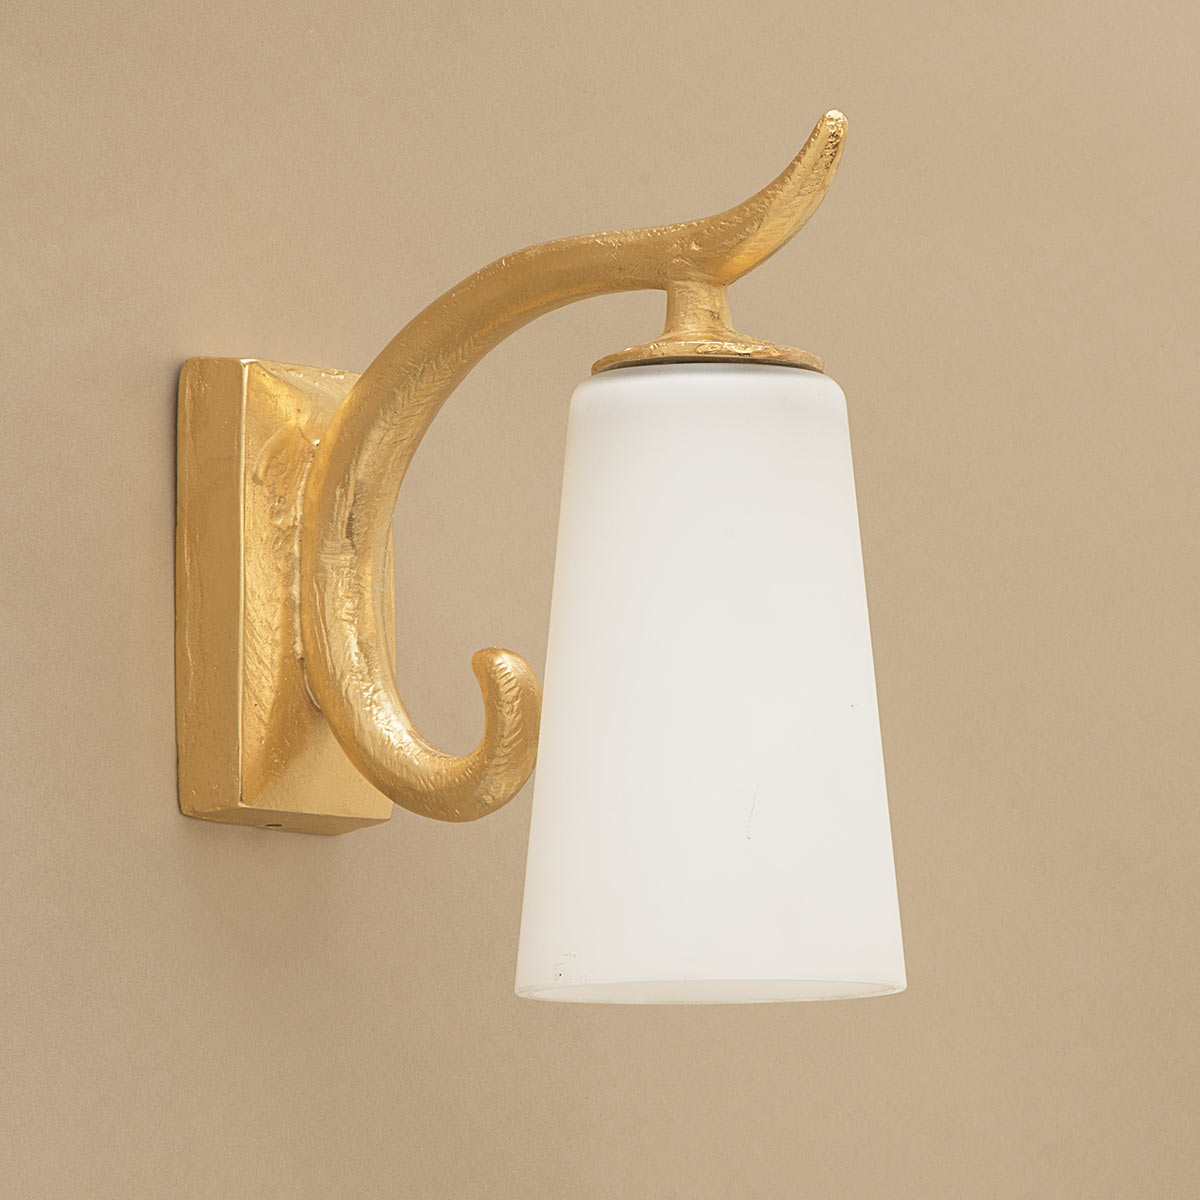 Small outdoor wall light with arched bracket made of cast bronze Delia